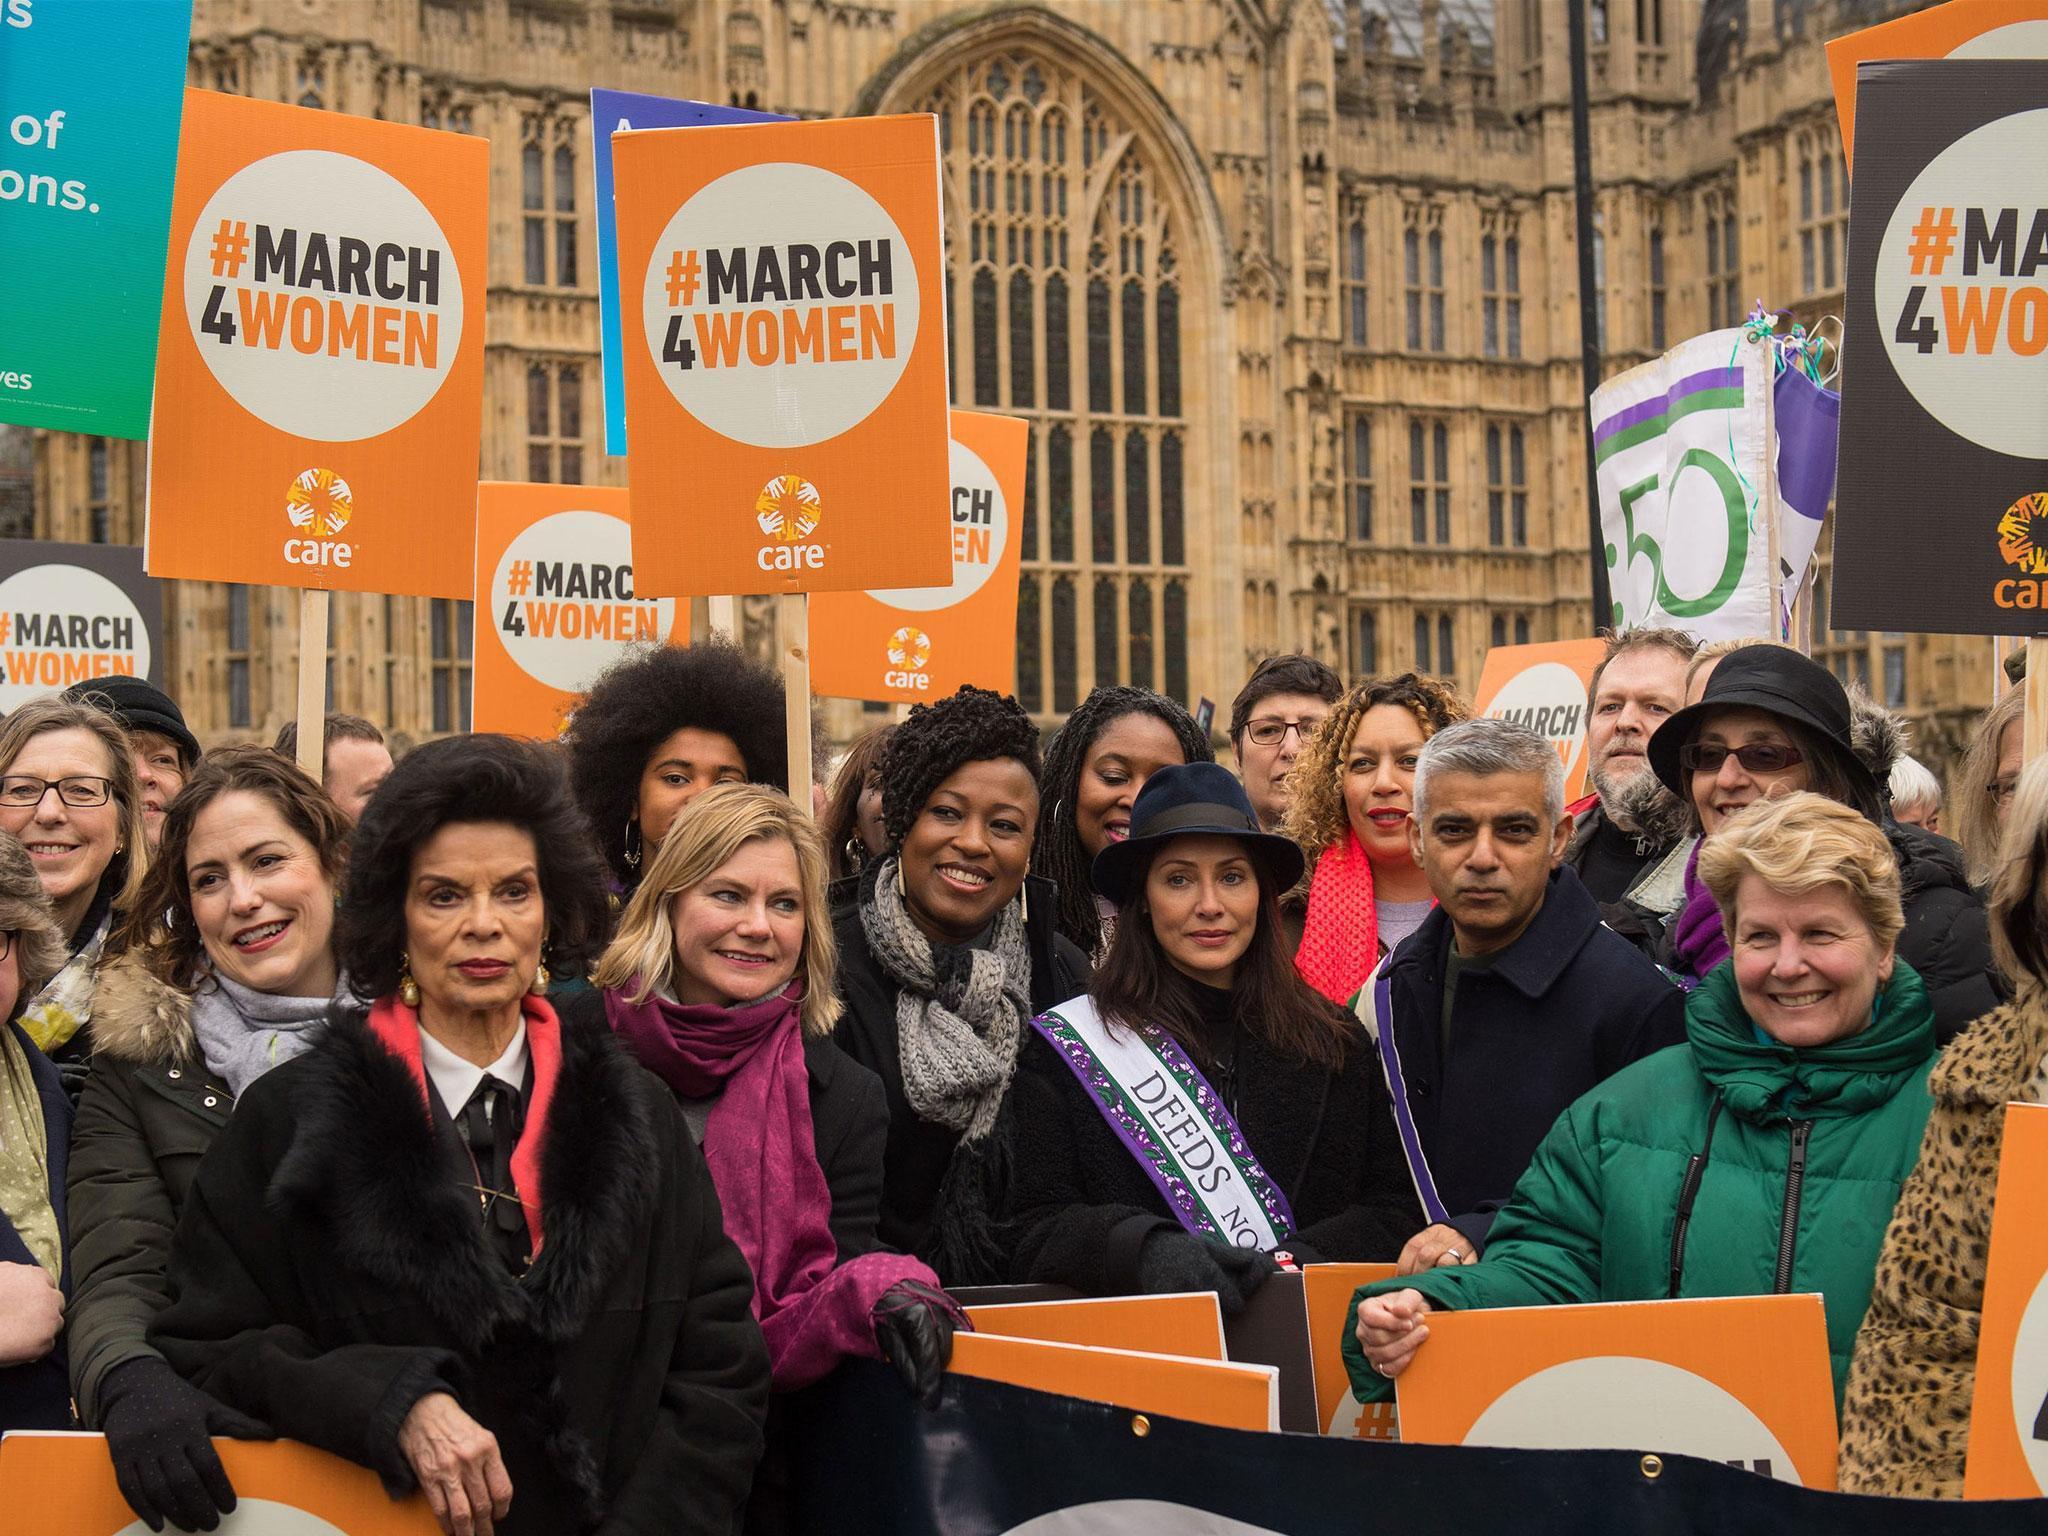 Marchers including (from third left to right) Bianca Jagger, Justine Greening, Natalie Imbruglia, the Mayor of London, Sadiq Khan, and Sandi Toksvig, gather outside the Palace of Westminster ahead of the March4Women